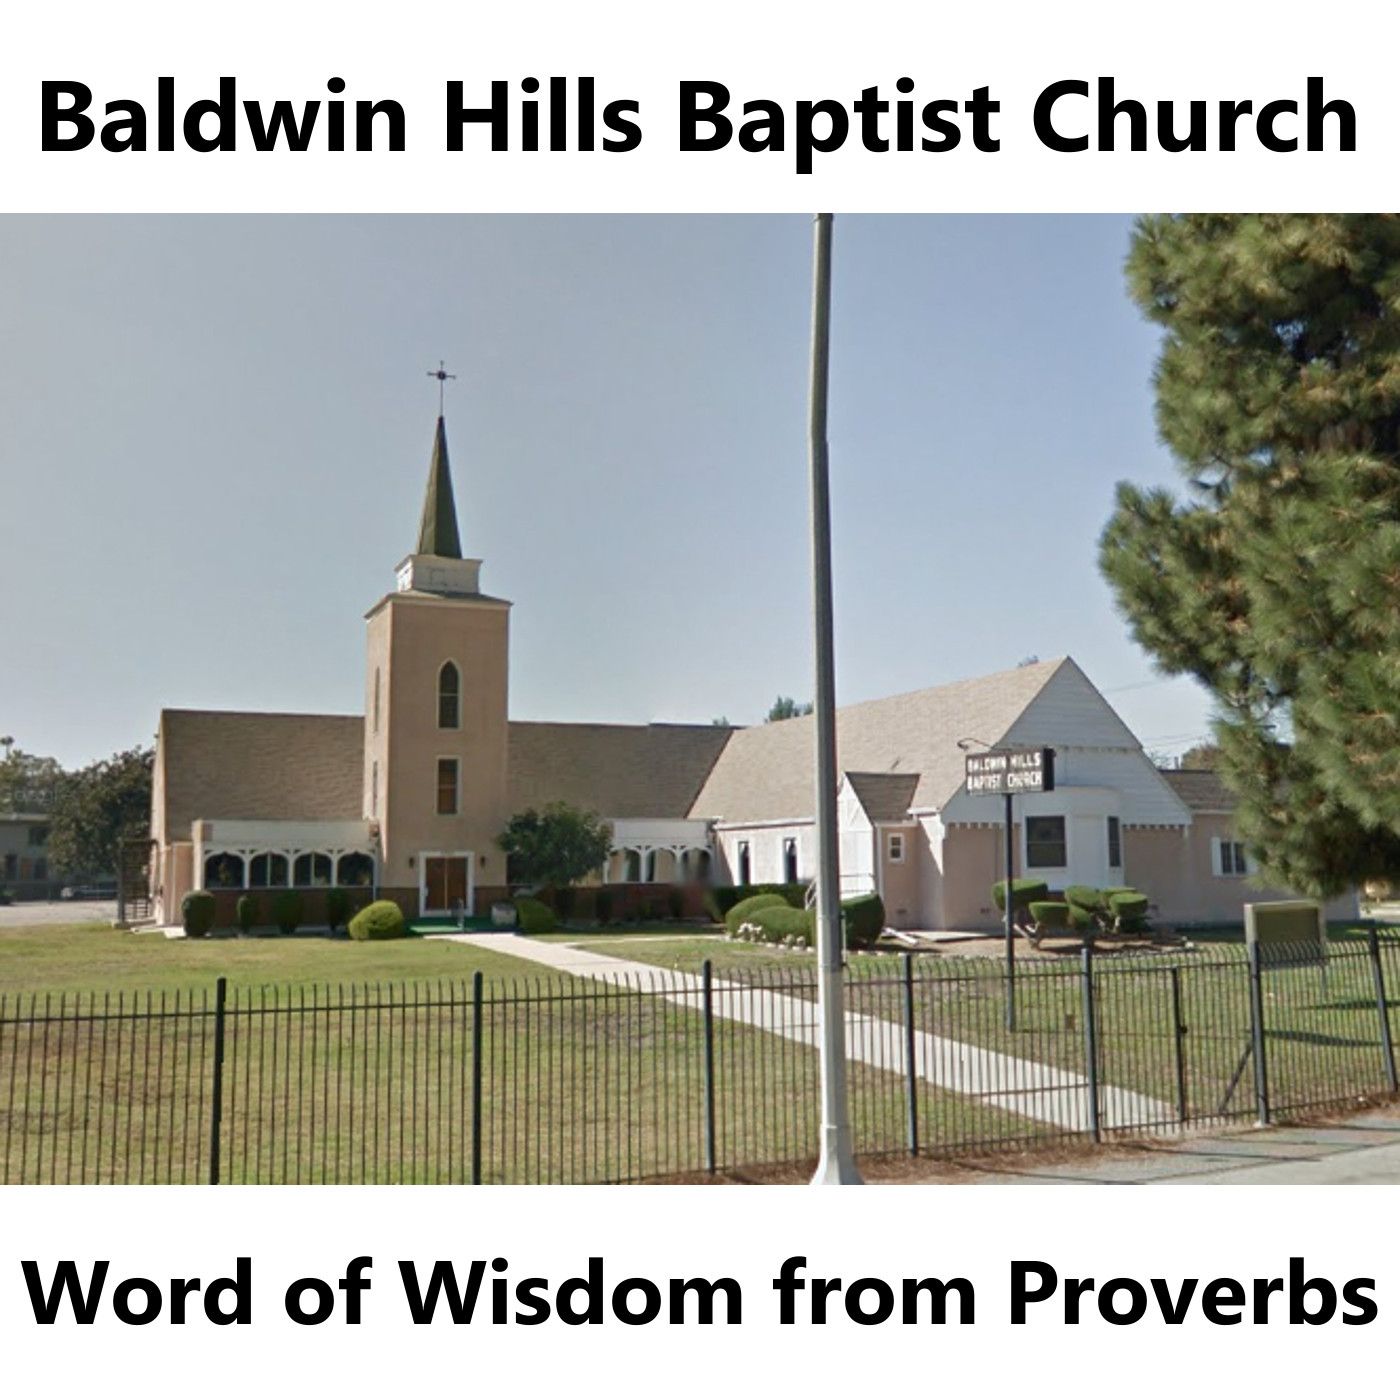 BHBC Word of Wisdom (from Proverbs)